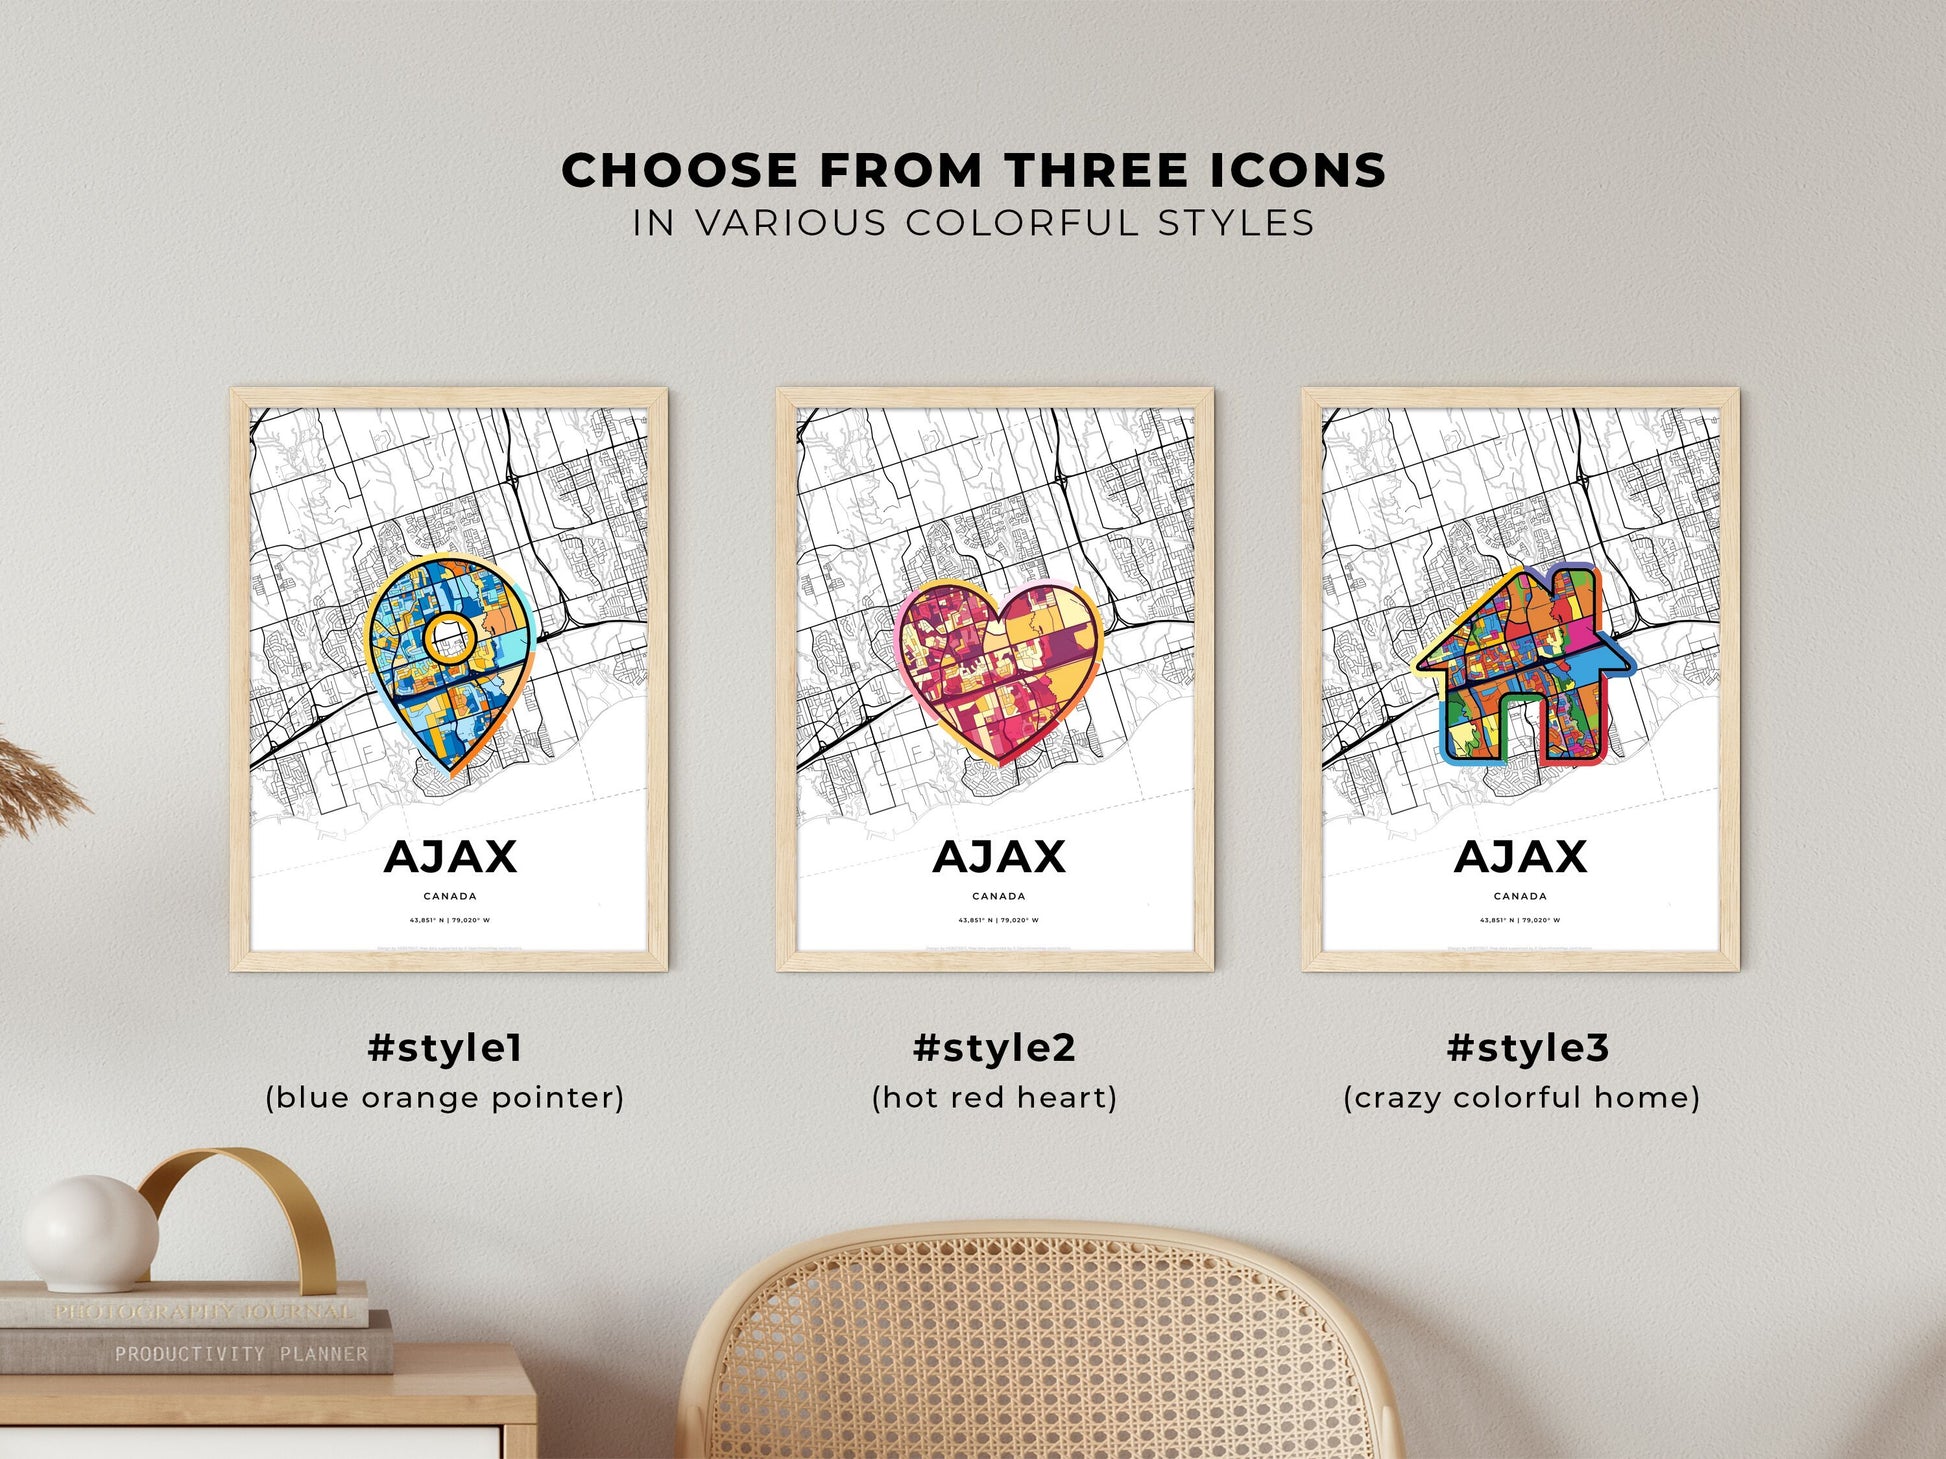 AJAX CANADA minimal art map with a colorful icon. Where it all began, Couple map gift.